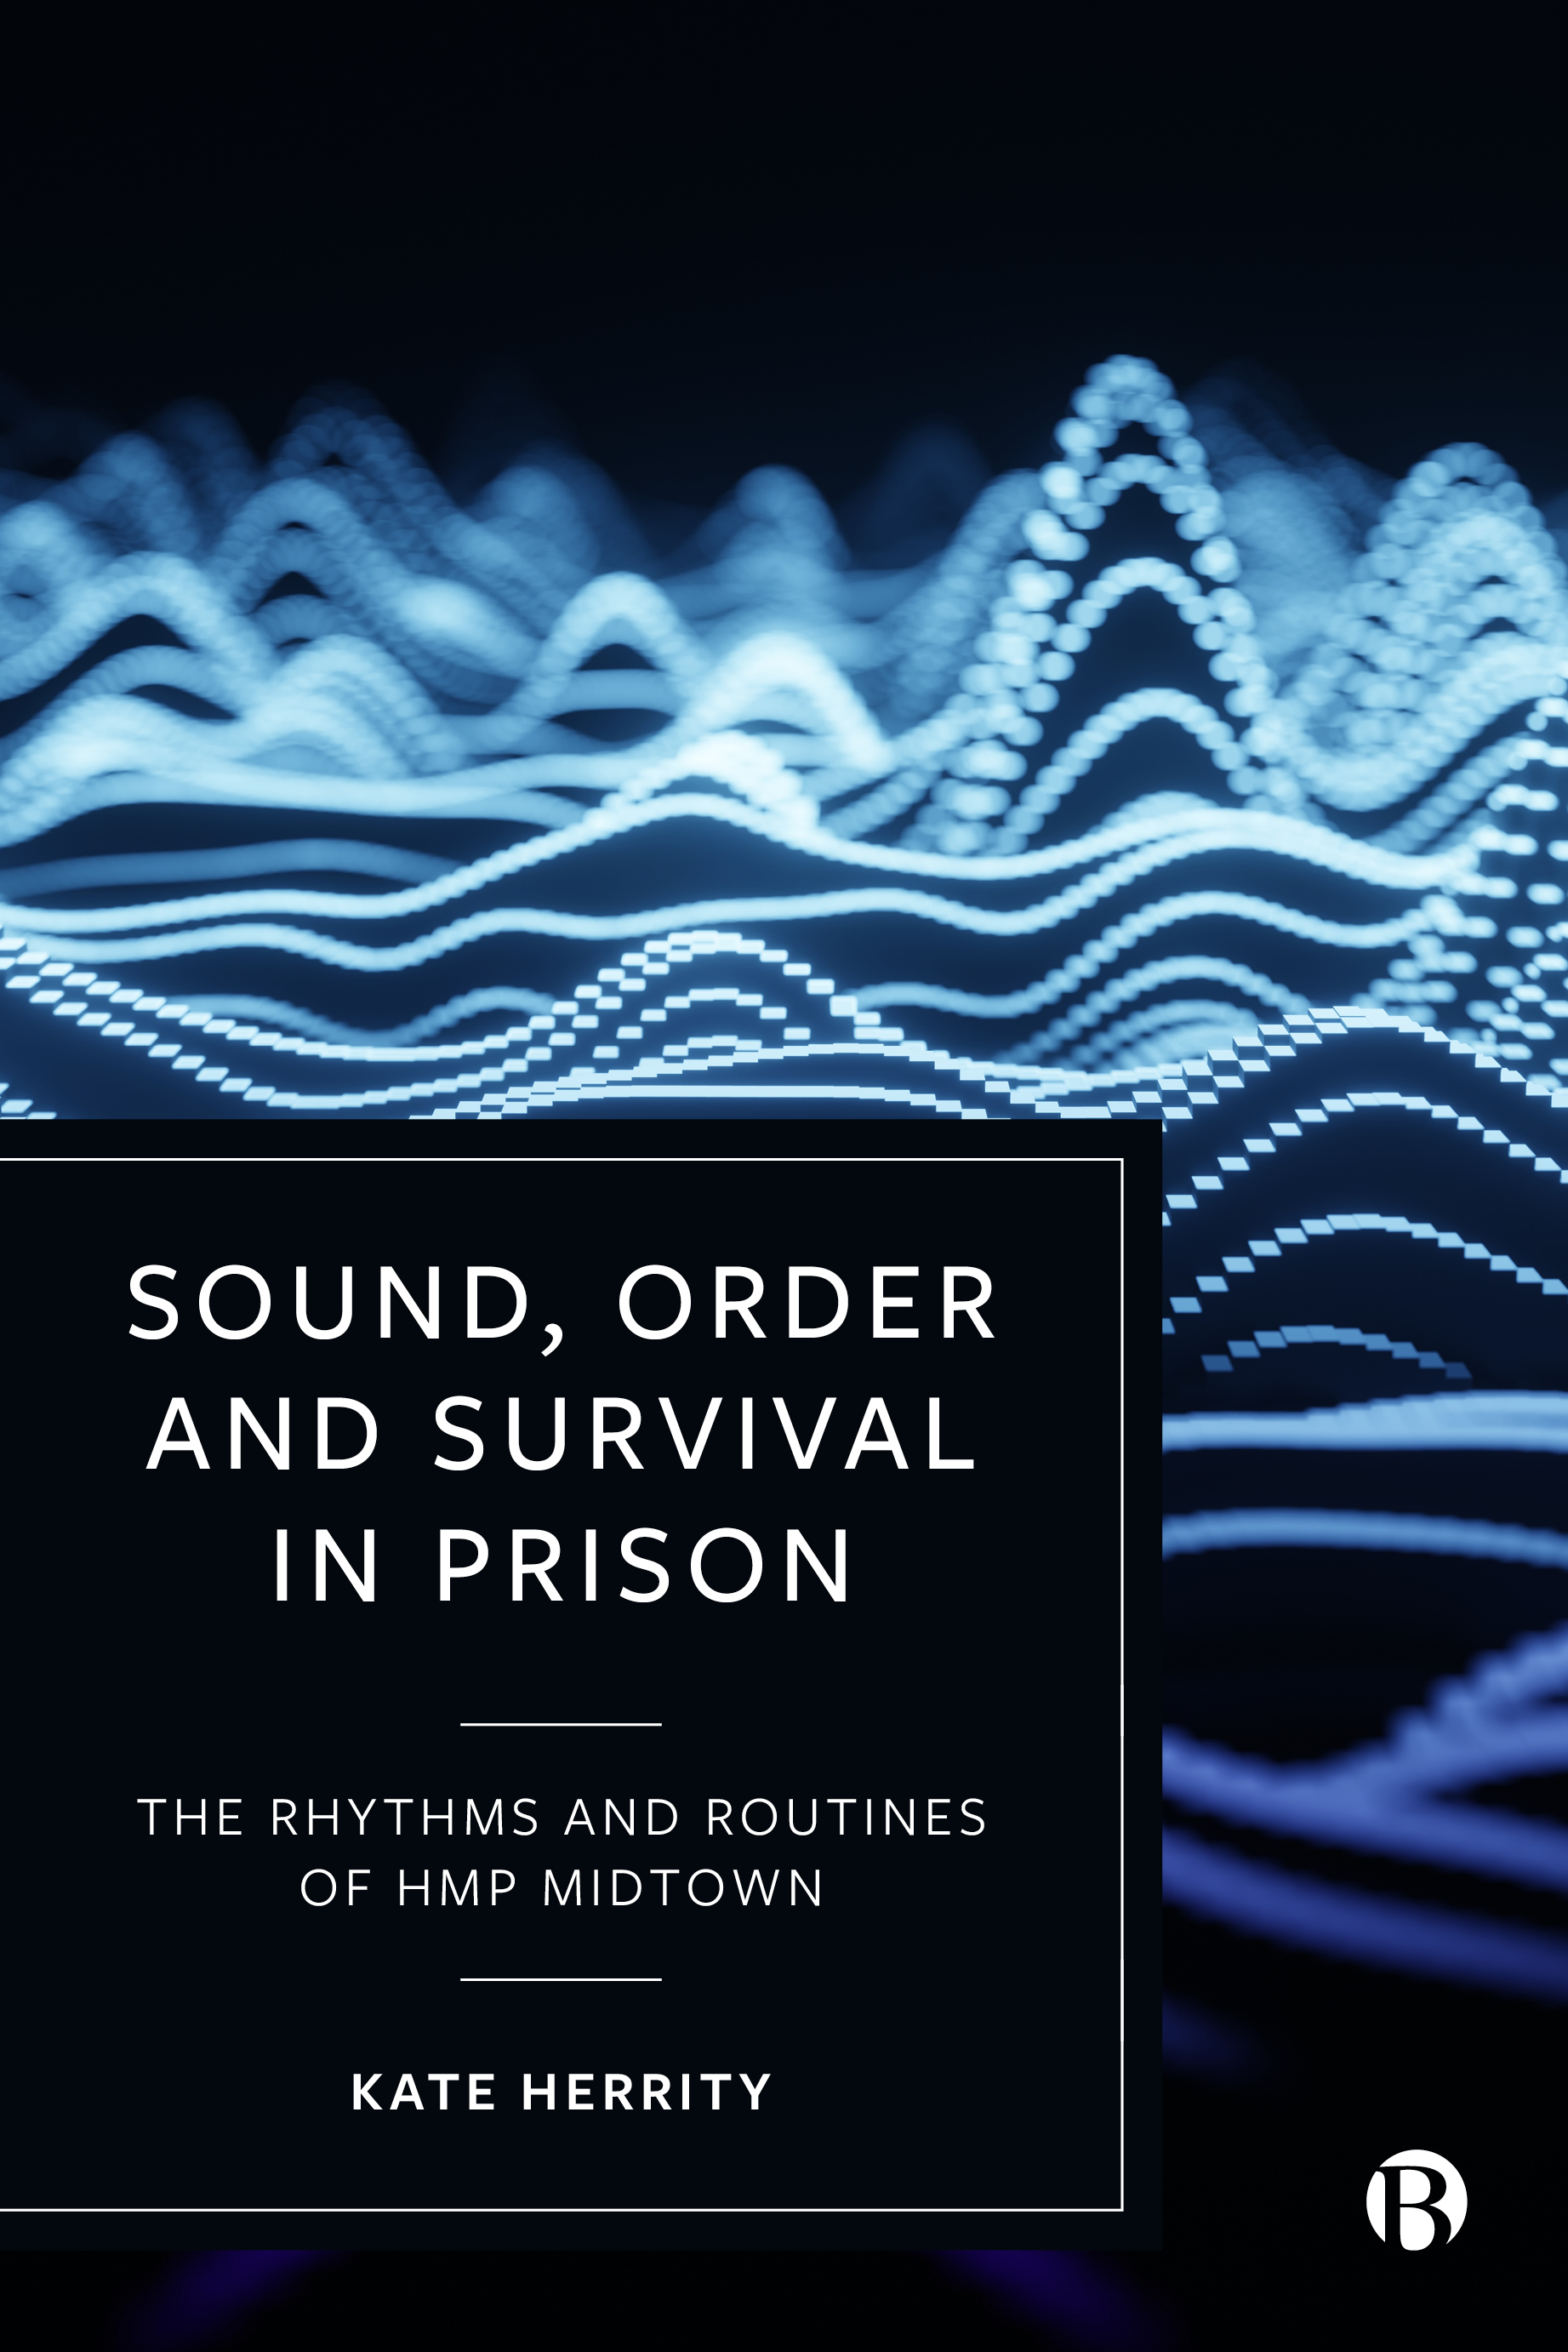 Sound, Order and Survival in Prison wins the BSC Book Award